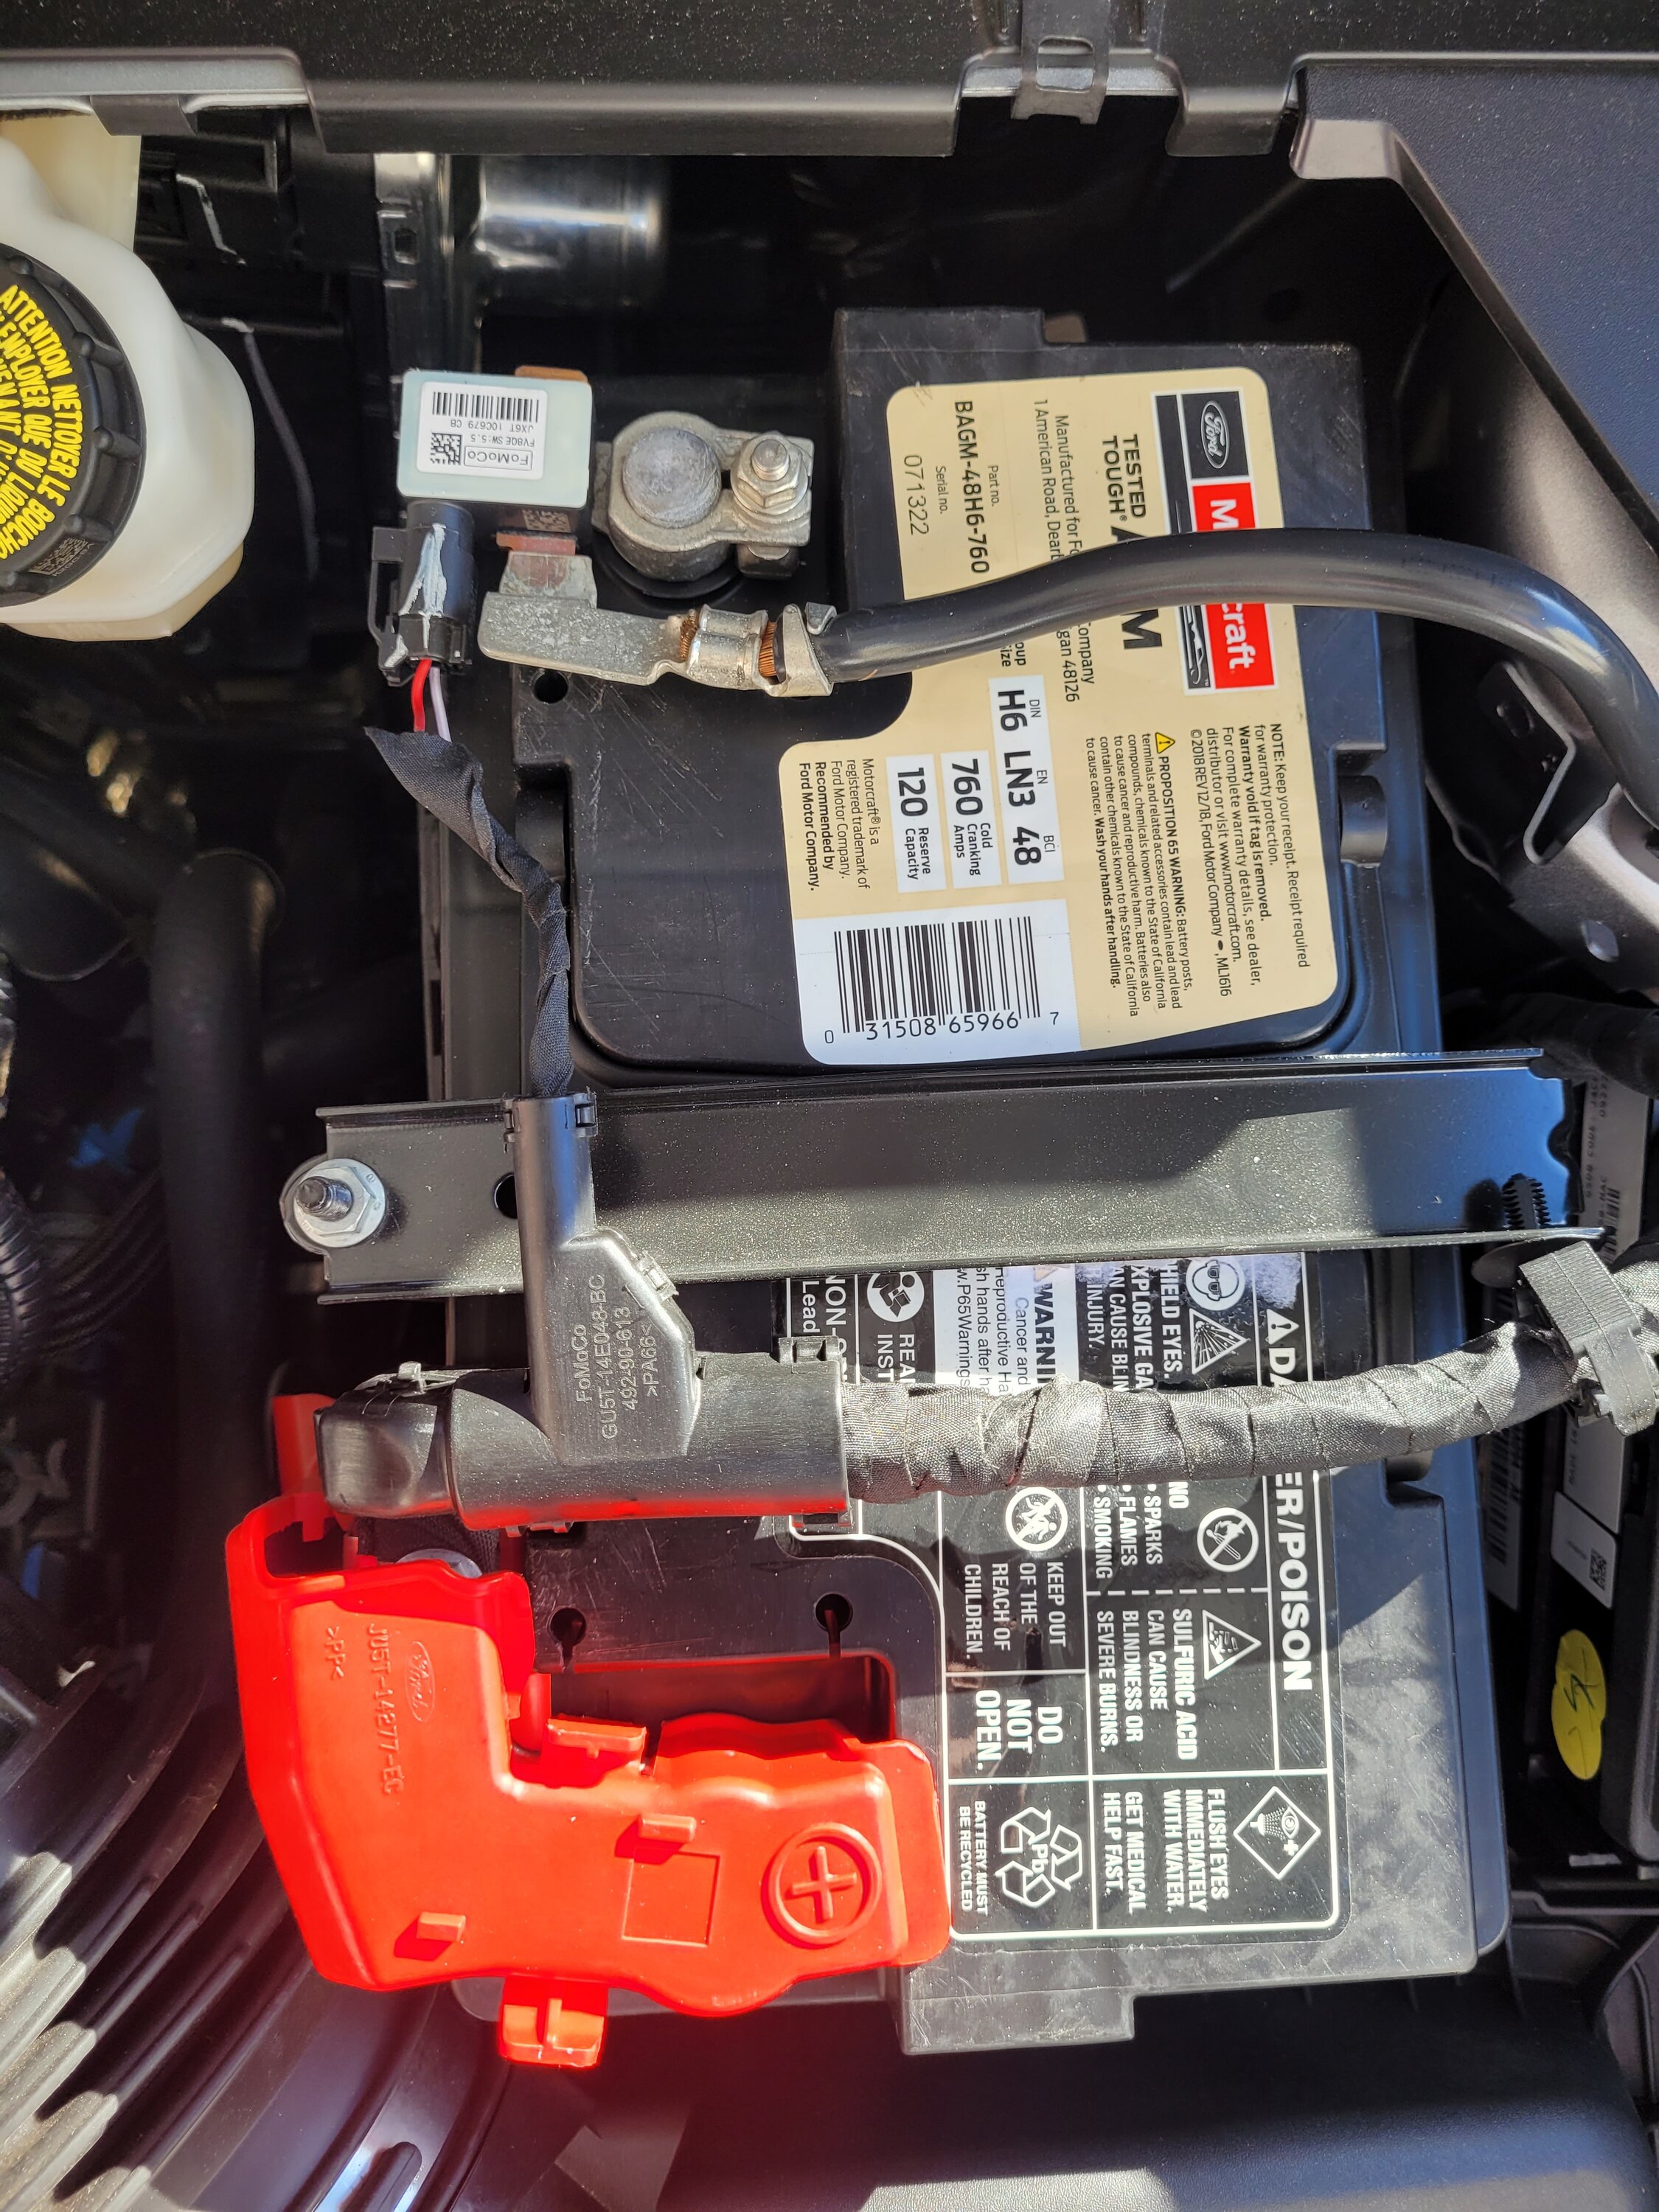 Ford Maverick Battery replacement under warranty AGM upgrade 20221012_100326